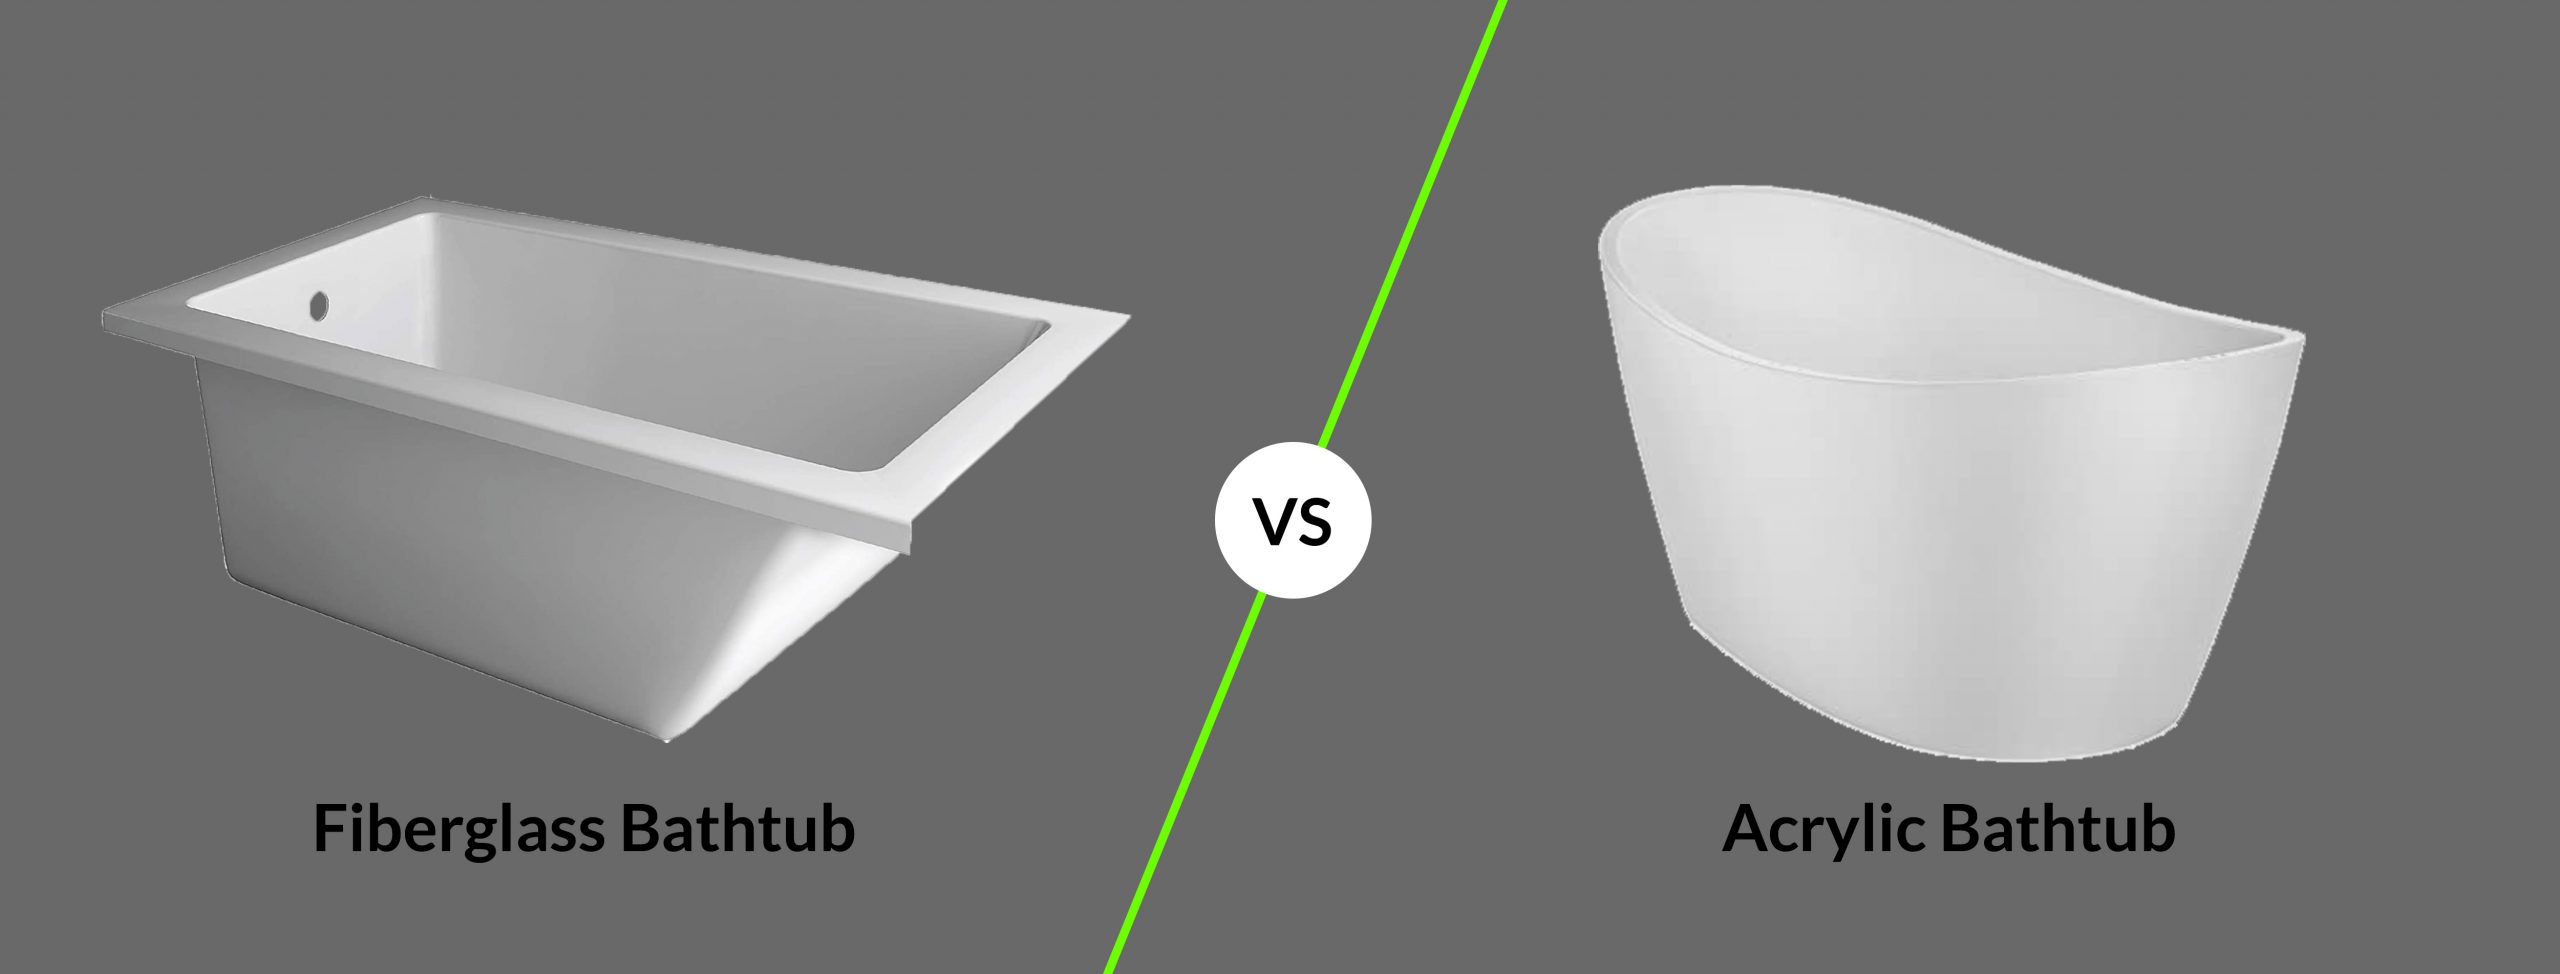 How To Tell If A Bathtub Is Acrylic Or Fiberglass?